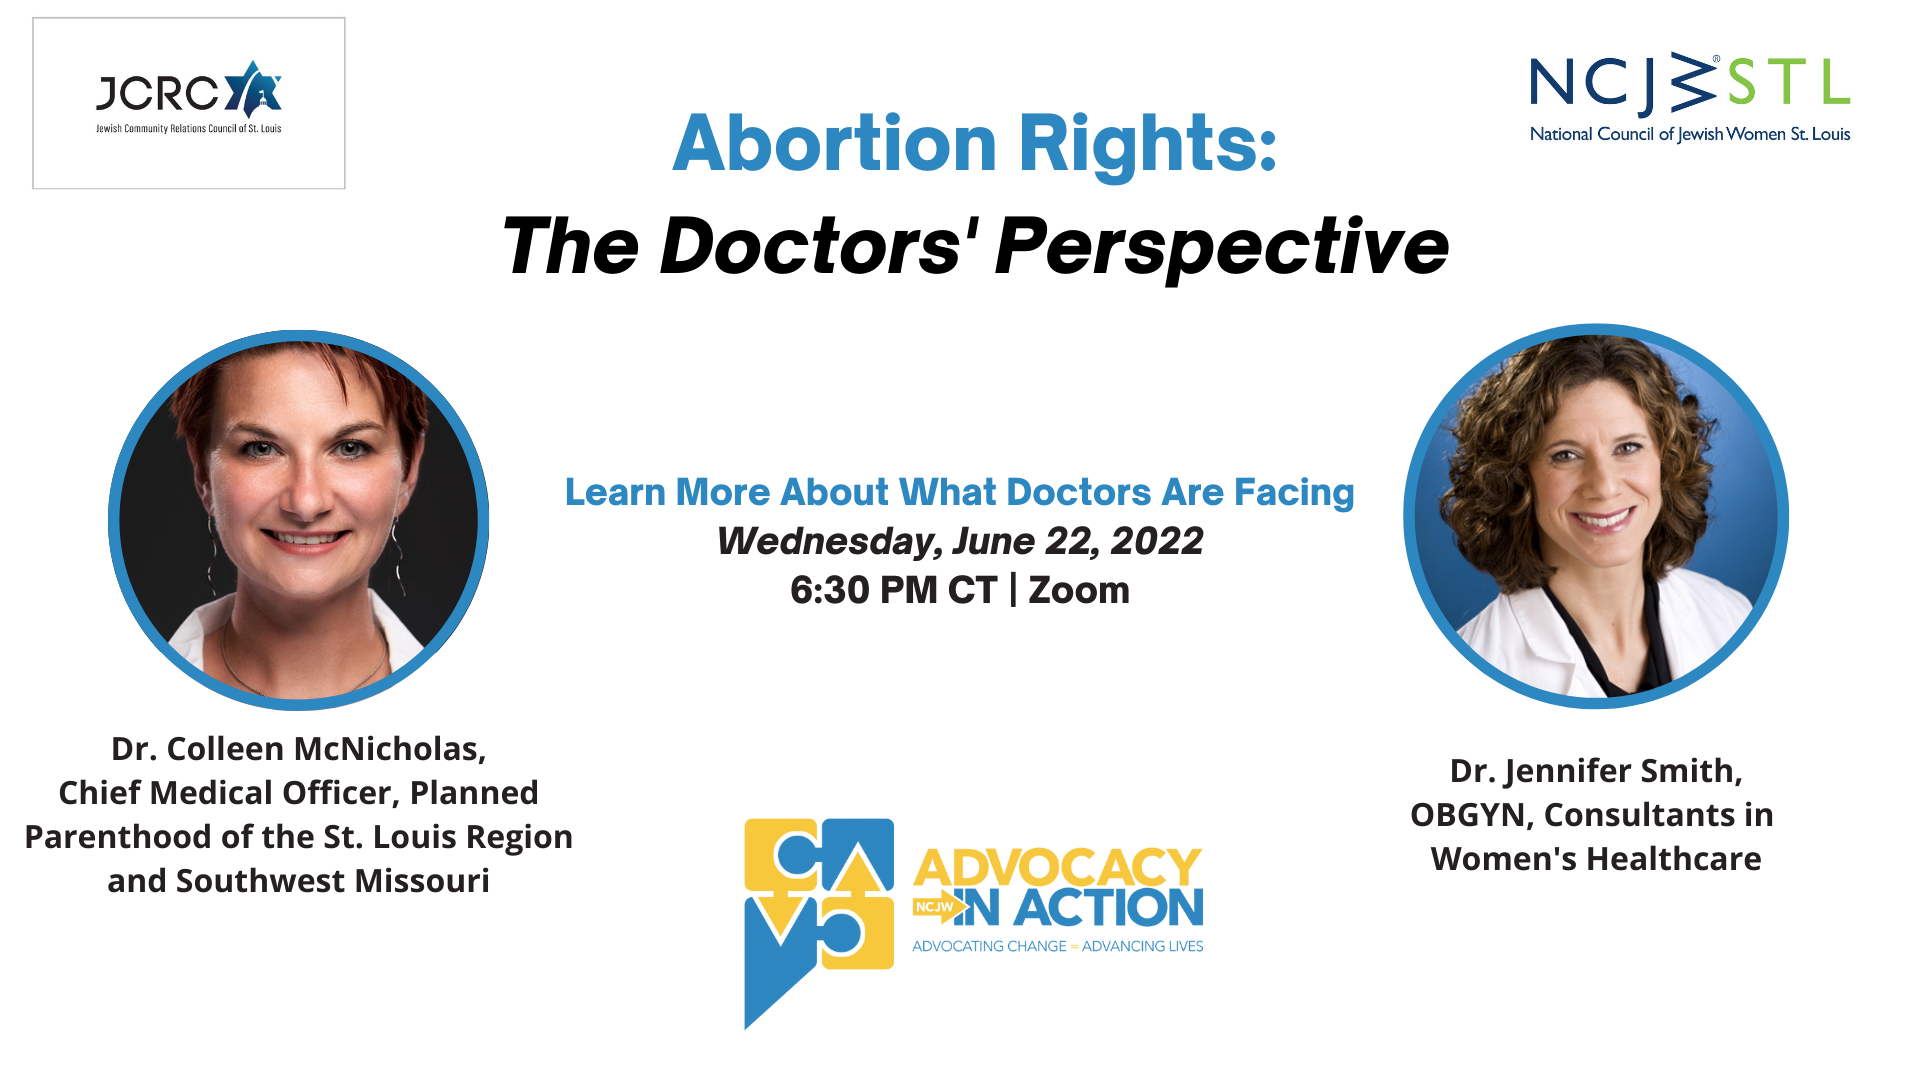 Abortion Rights: The Doctors' Perspective